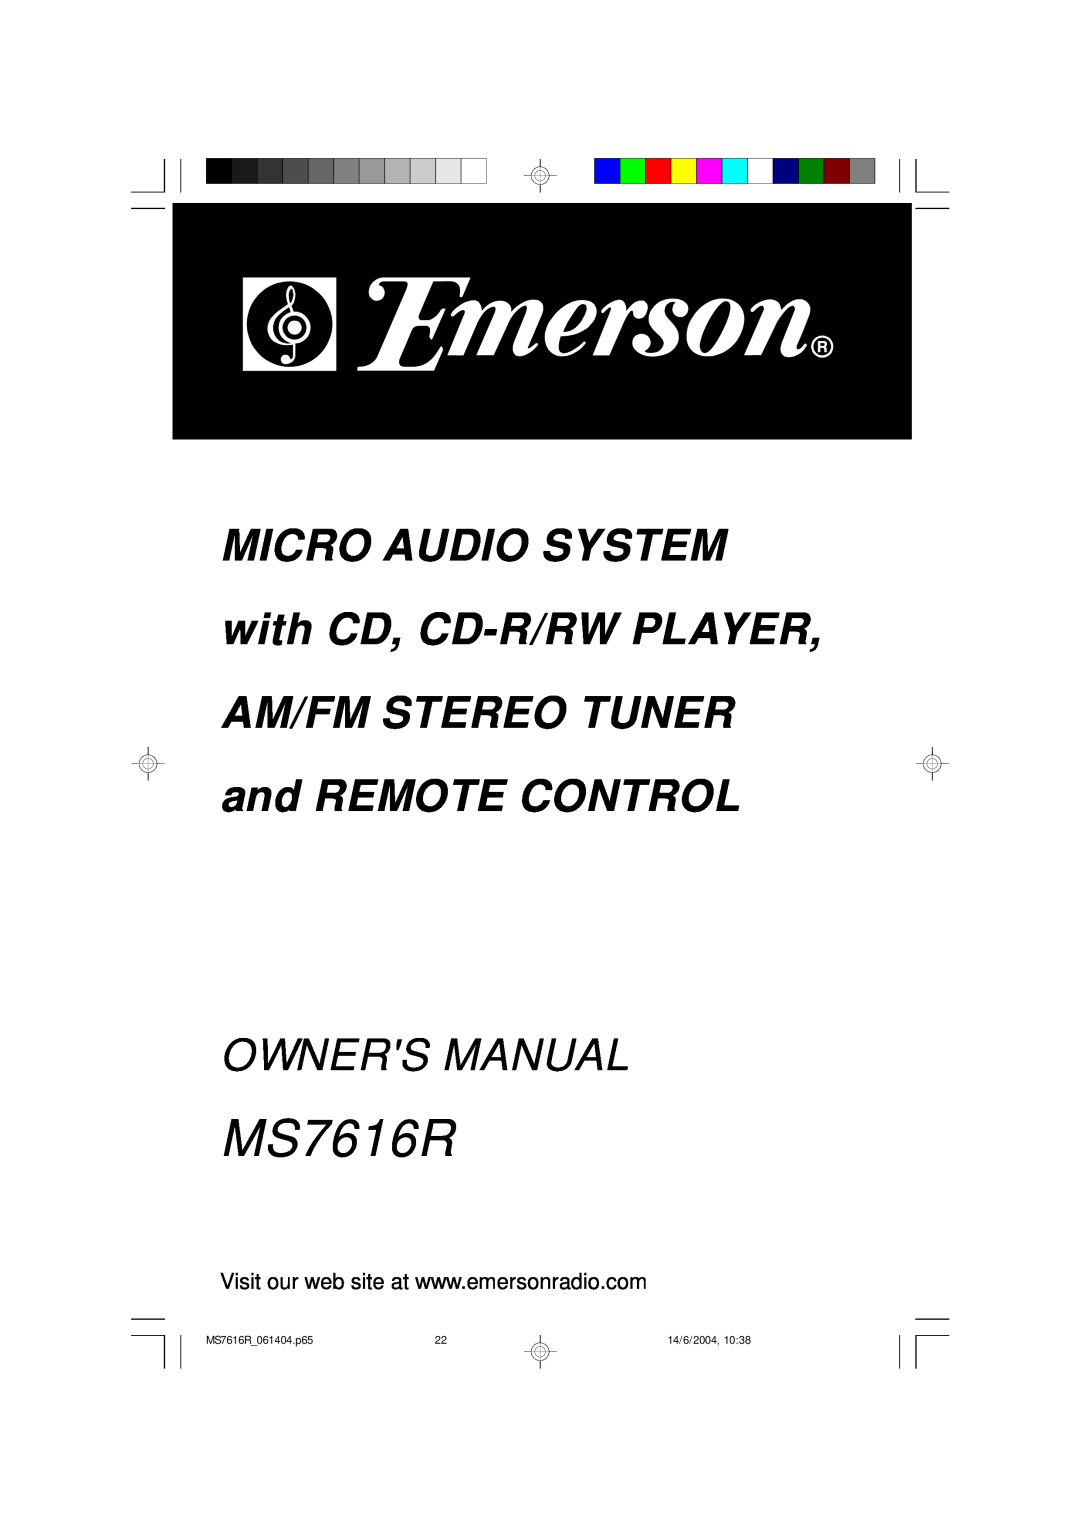 Emerson MS7616R owner manual MICRO AUDIO SYSTEM with CD, CD-R/RWPLAYER, AM/FM STEREO TUNER and REMOTE CONTROL, 14/6/2004 